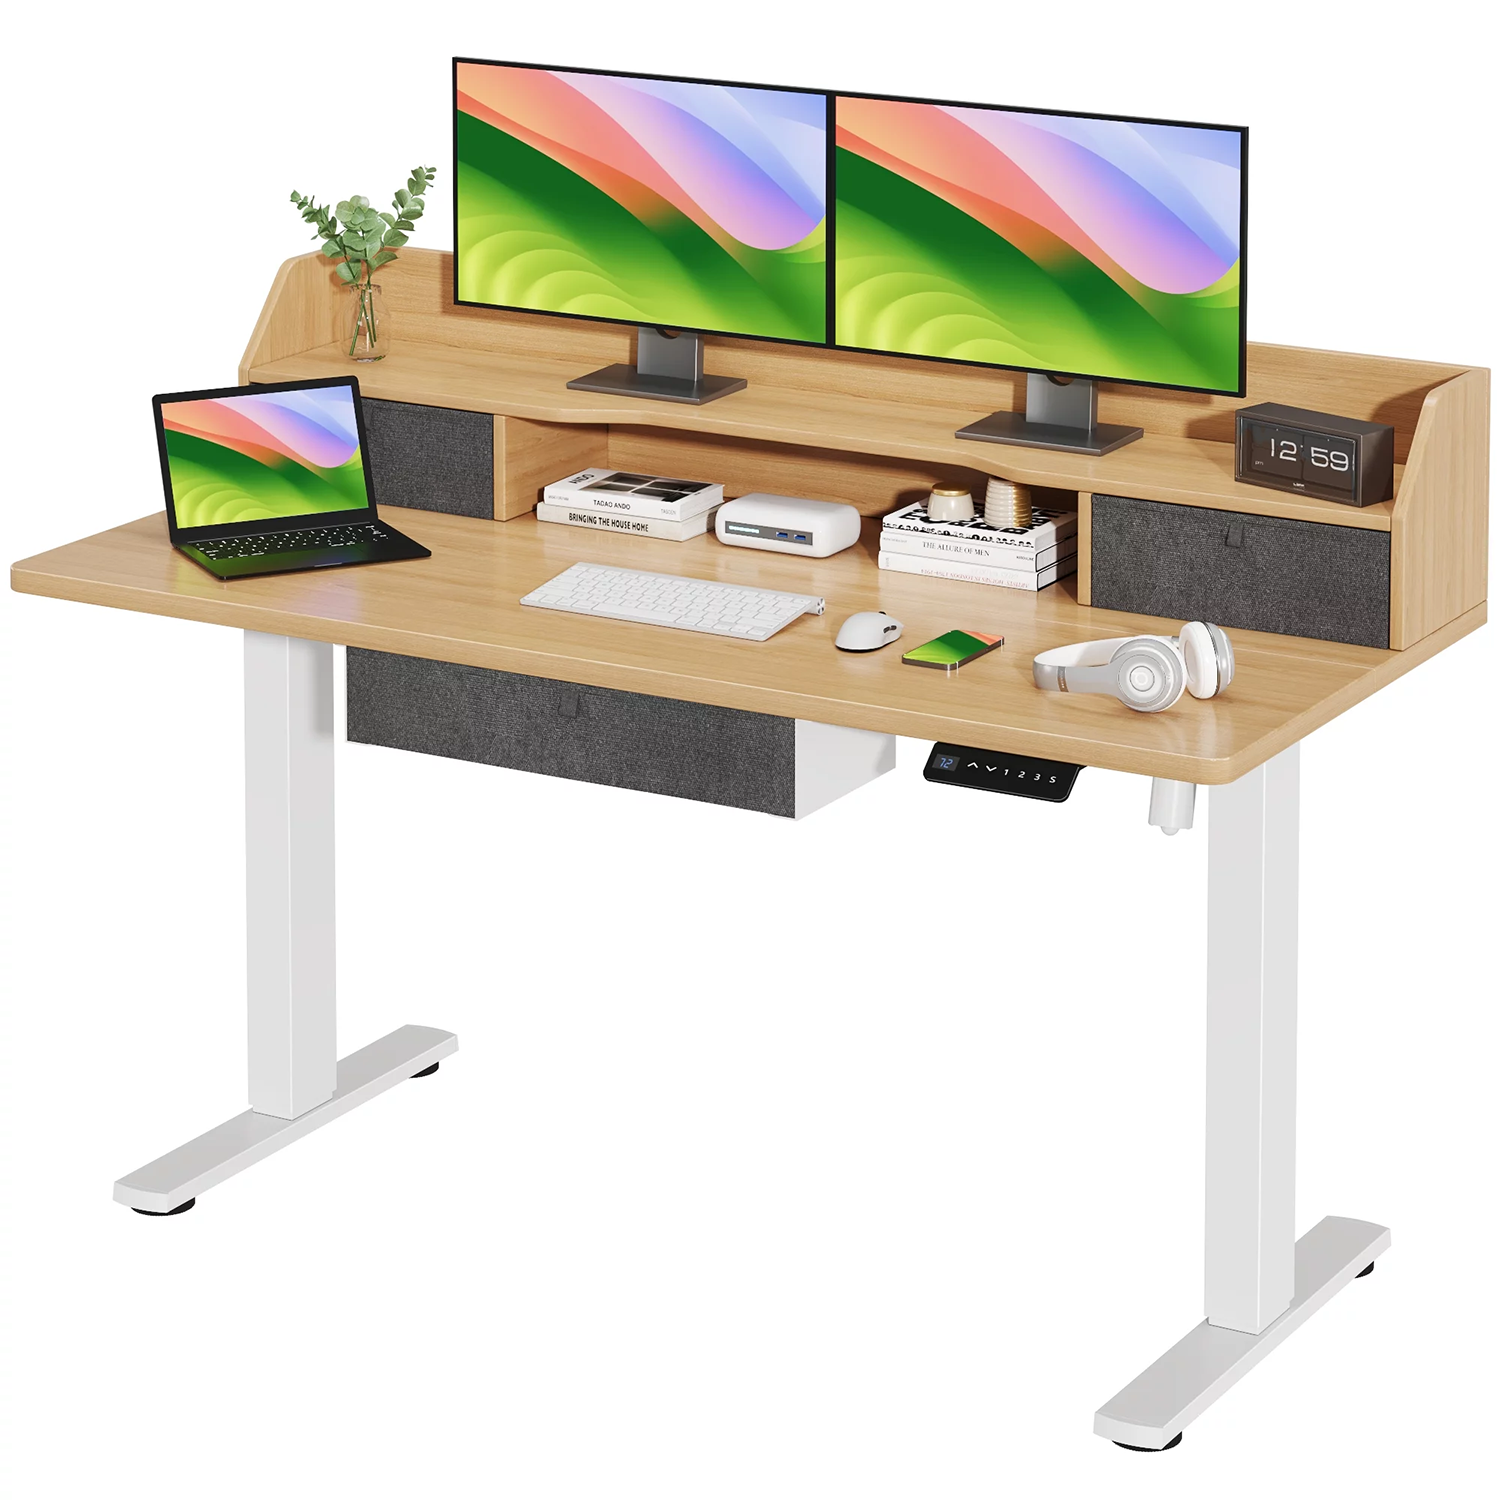 Vineego Electric Standing Desk Height Adjustable Office Desk with 55” x  27.5” Tabletop Home Office Workstation, Beige Finish 